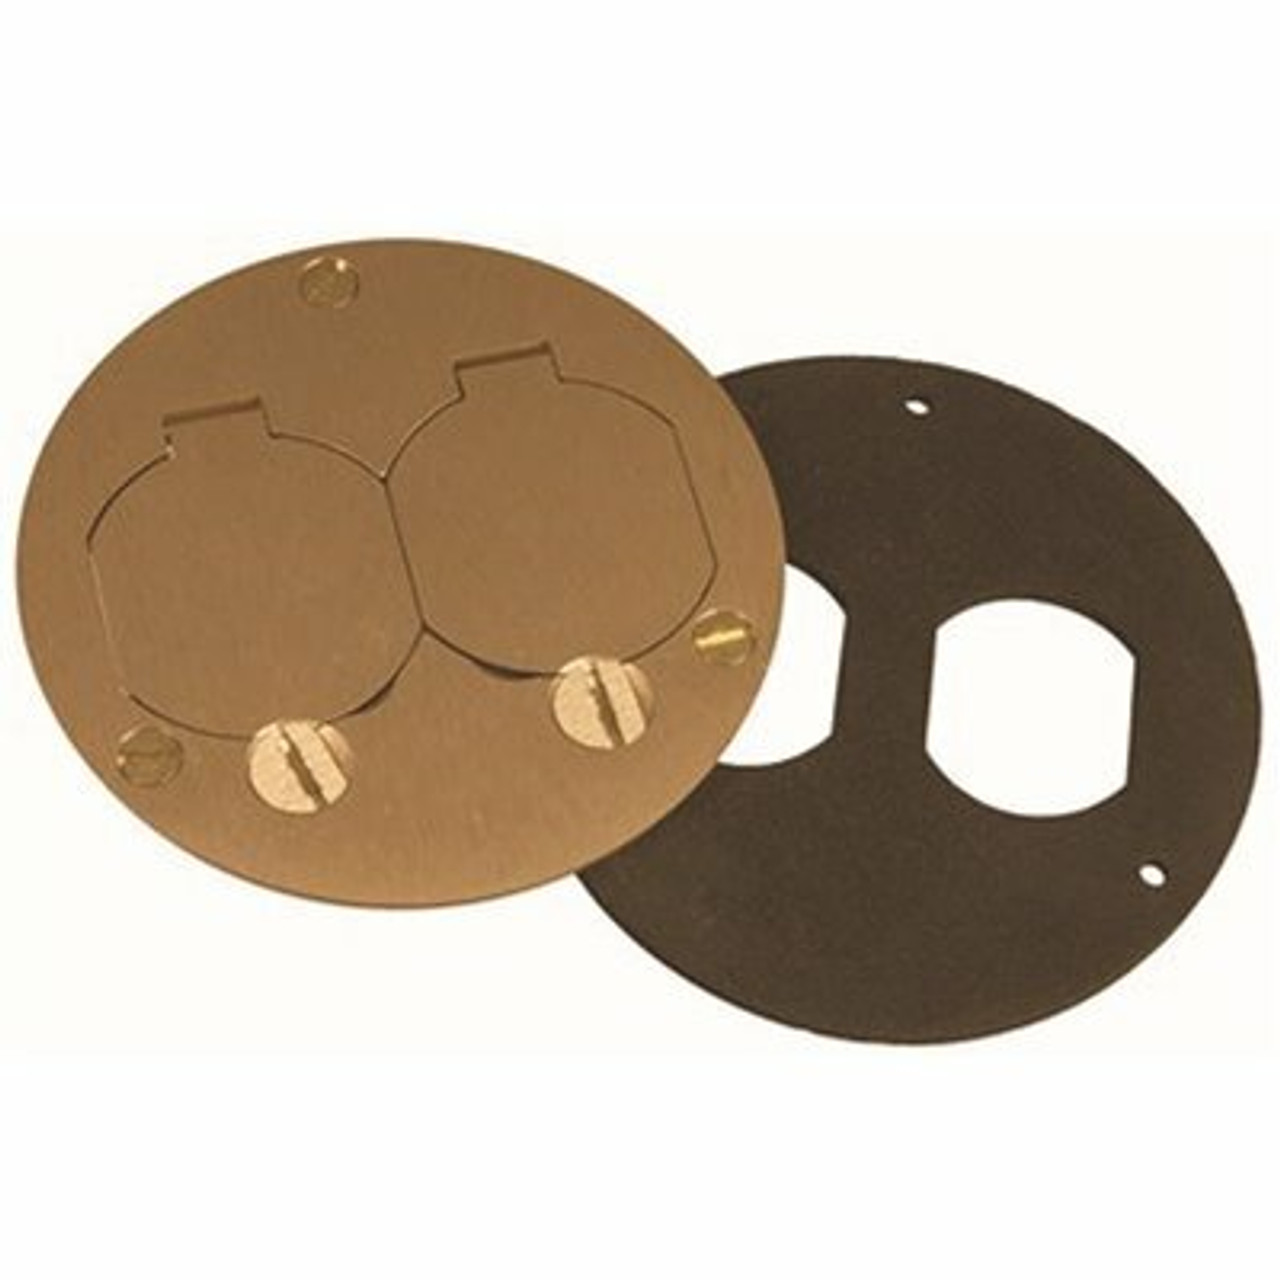 Raco 3-7/8 In. Dia Brass Duplex Cover With Lift Lids, Round